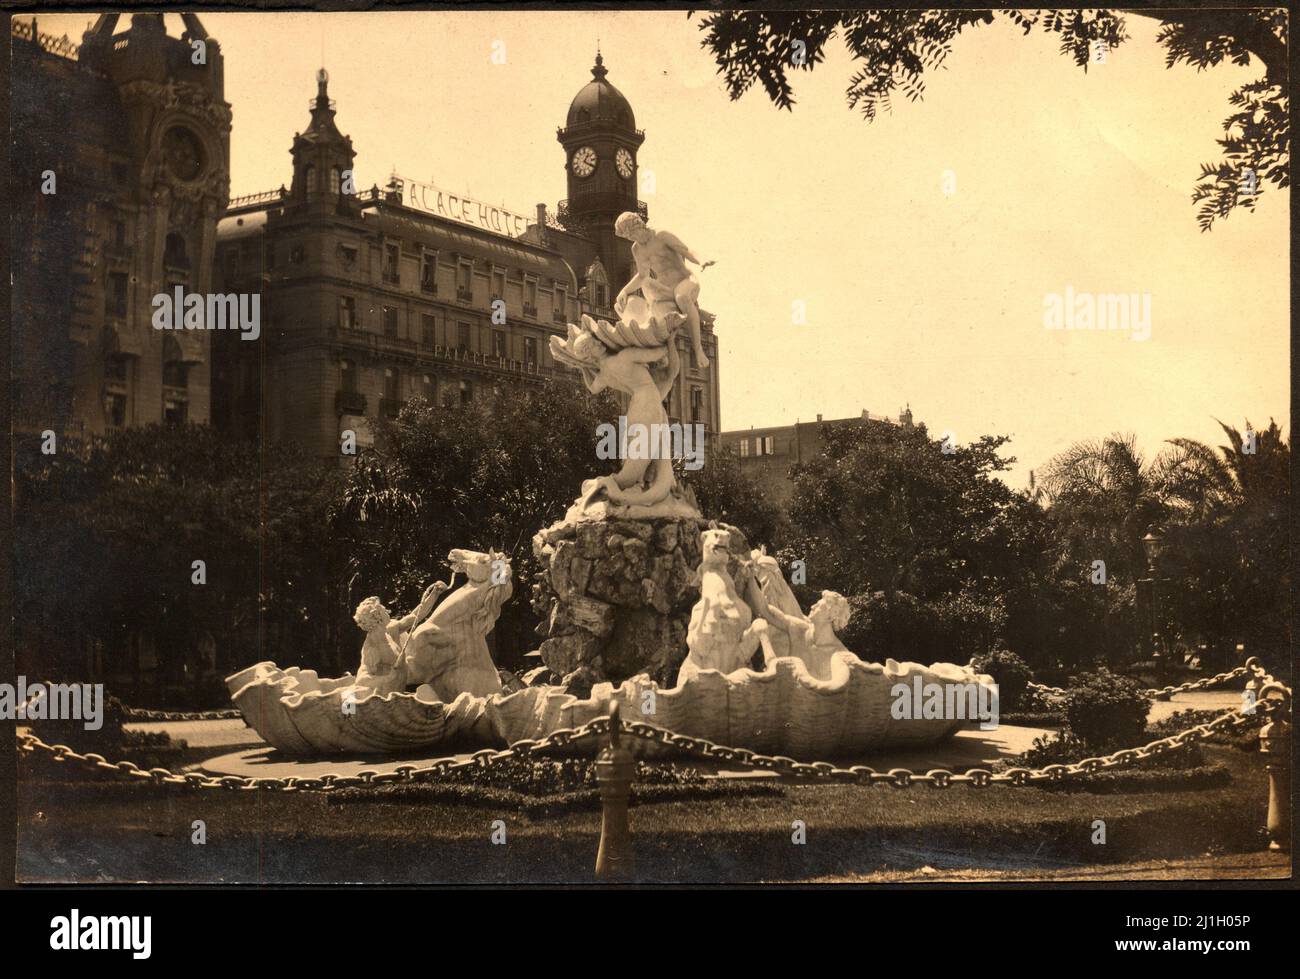 The Nereidas fountain, created by the artist Lola Mora at its original location in Buenos Aires, Argentina. Stock Photo